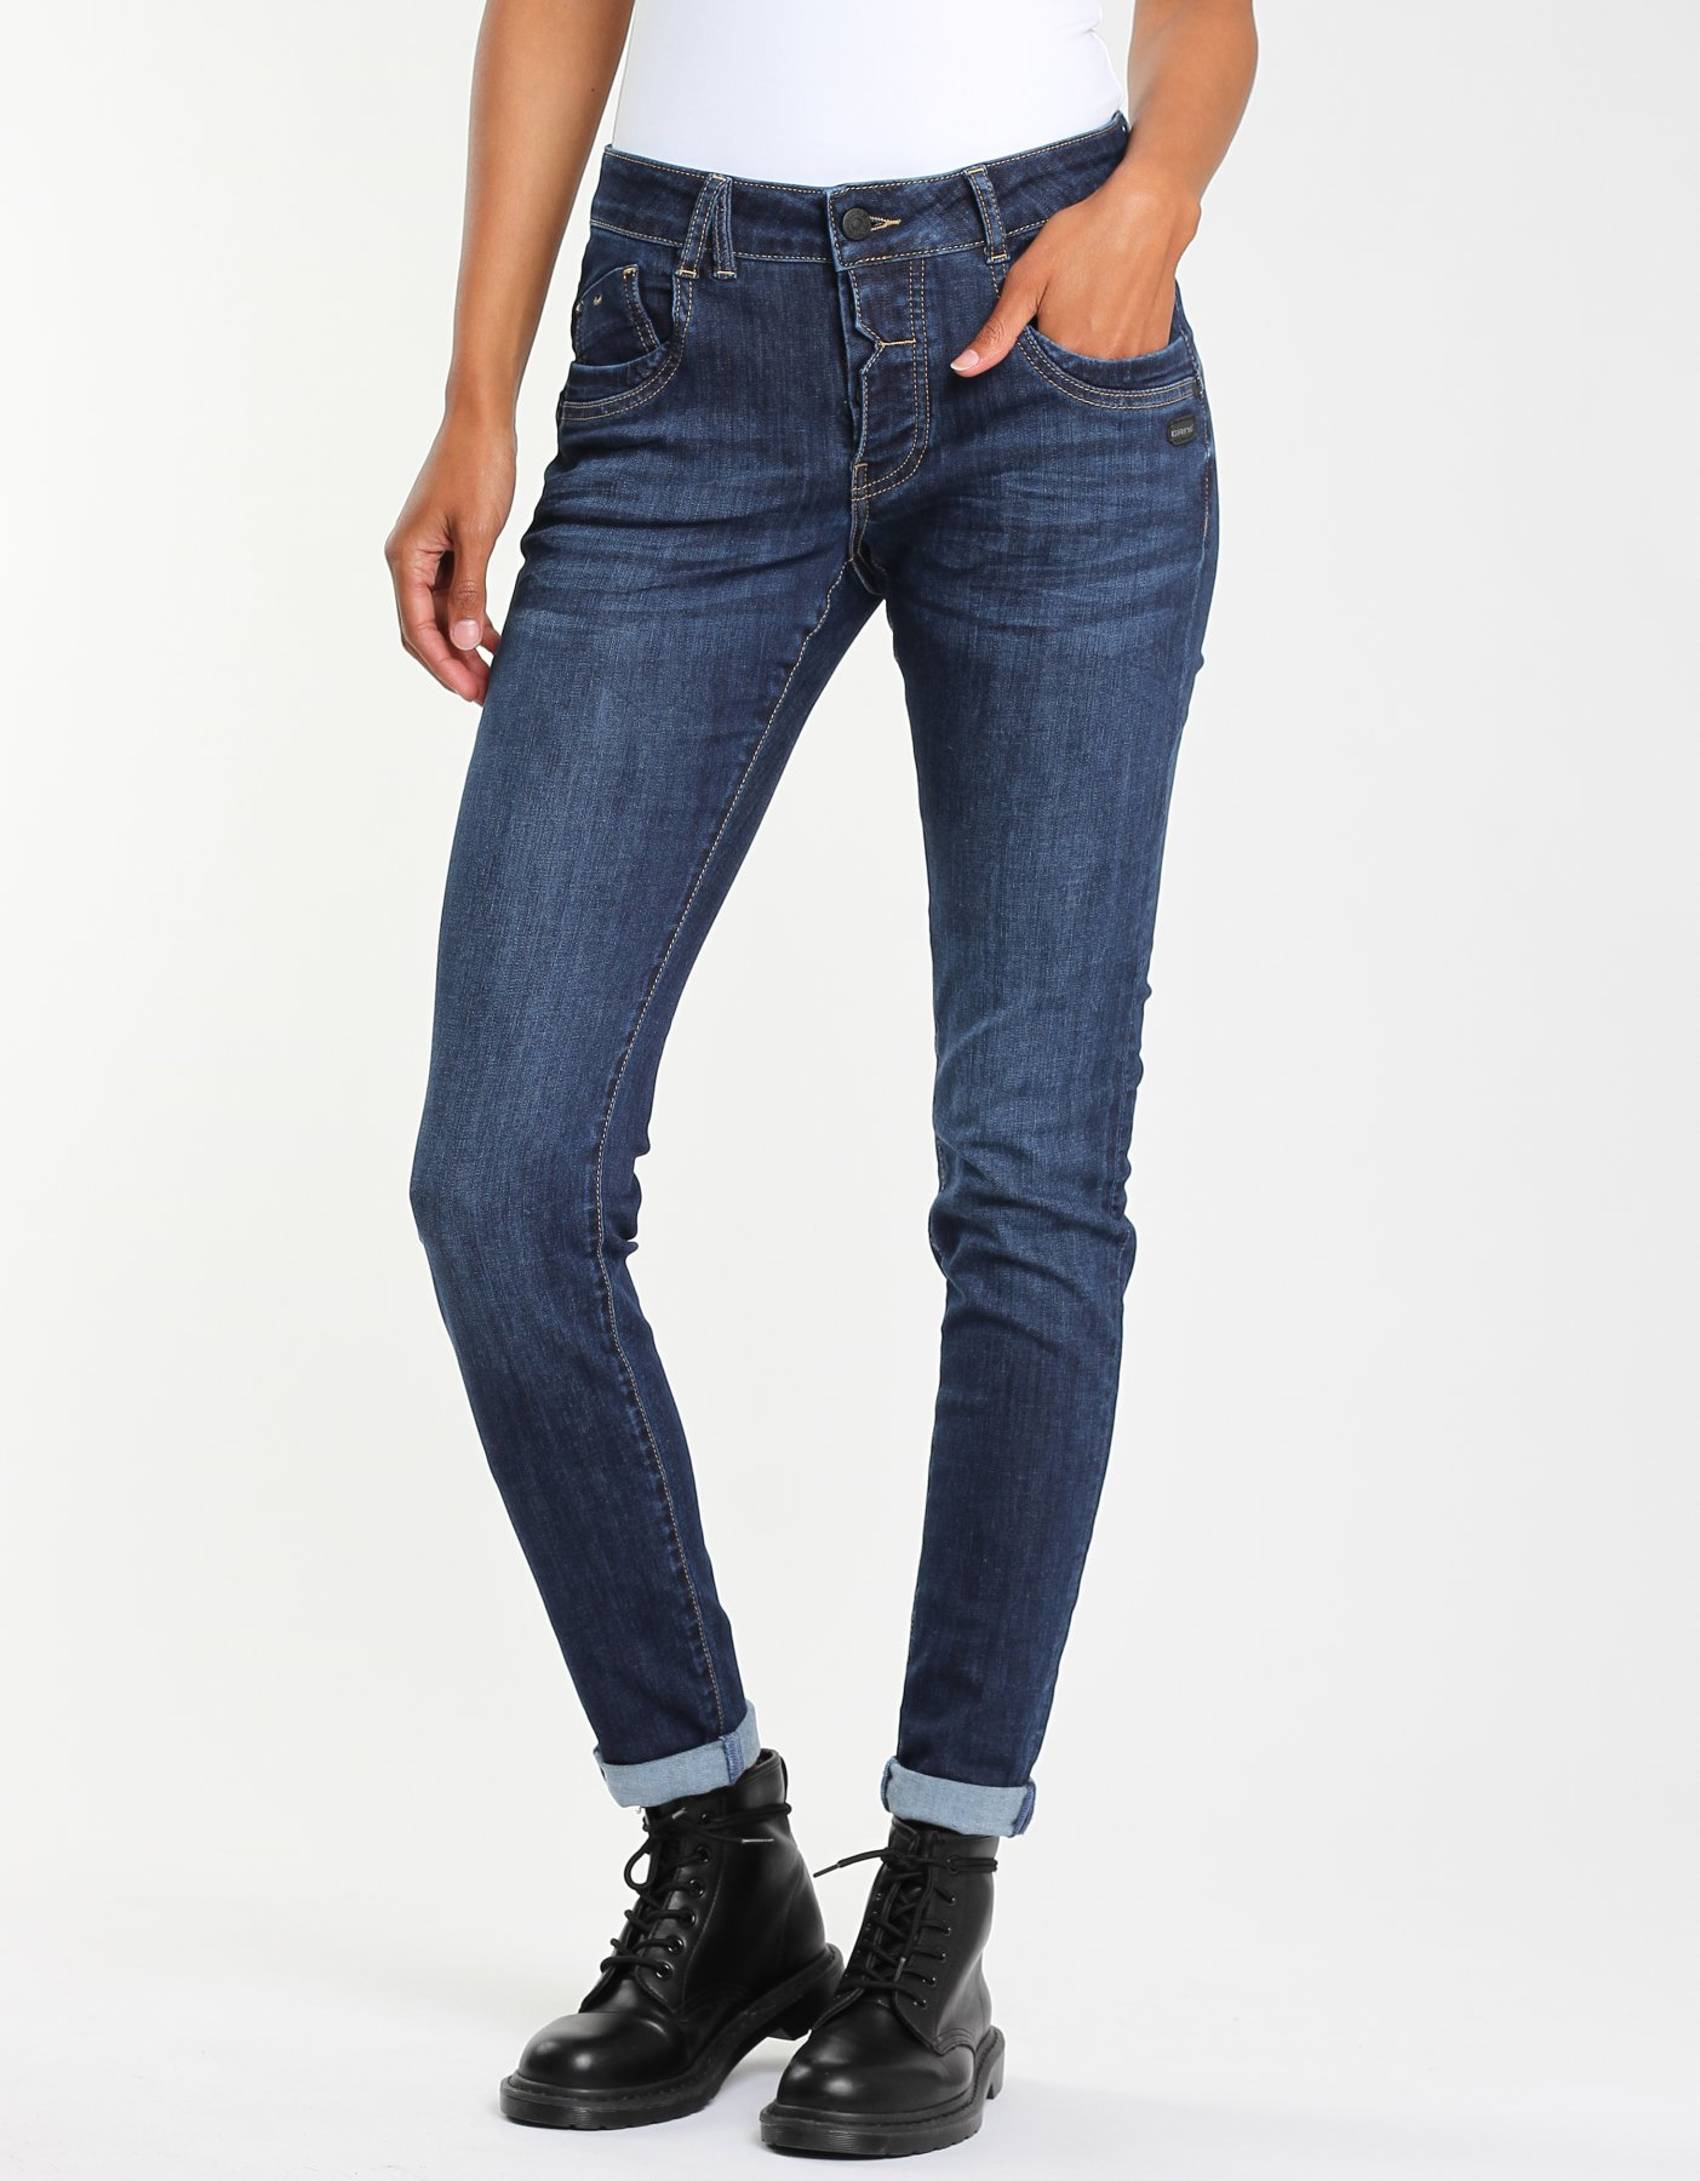 94Gerda - fit Jeans | GANG relaxed